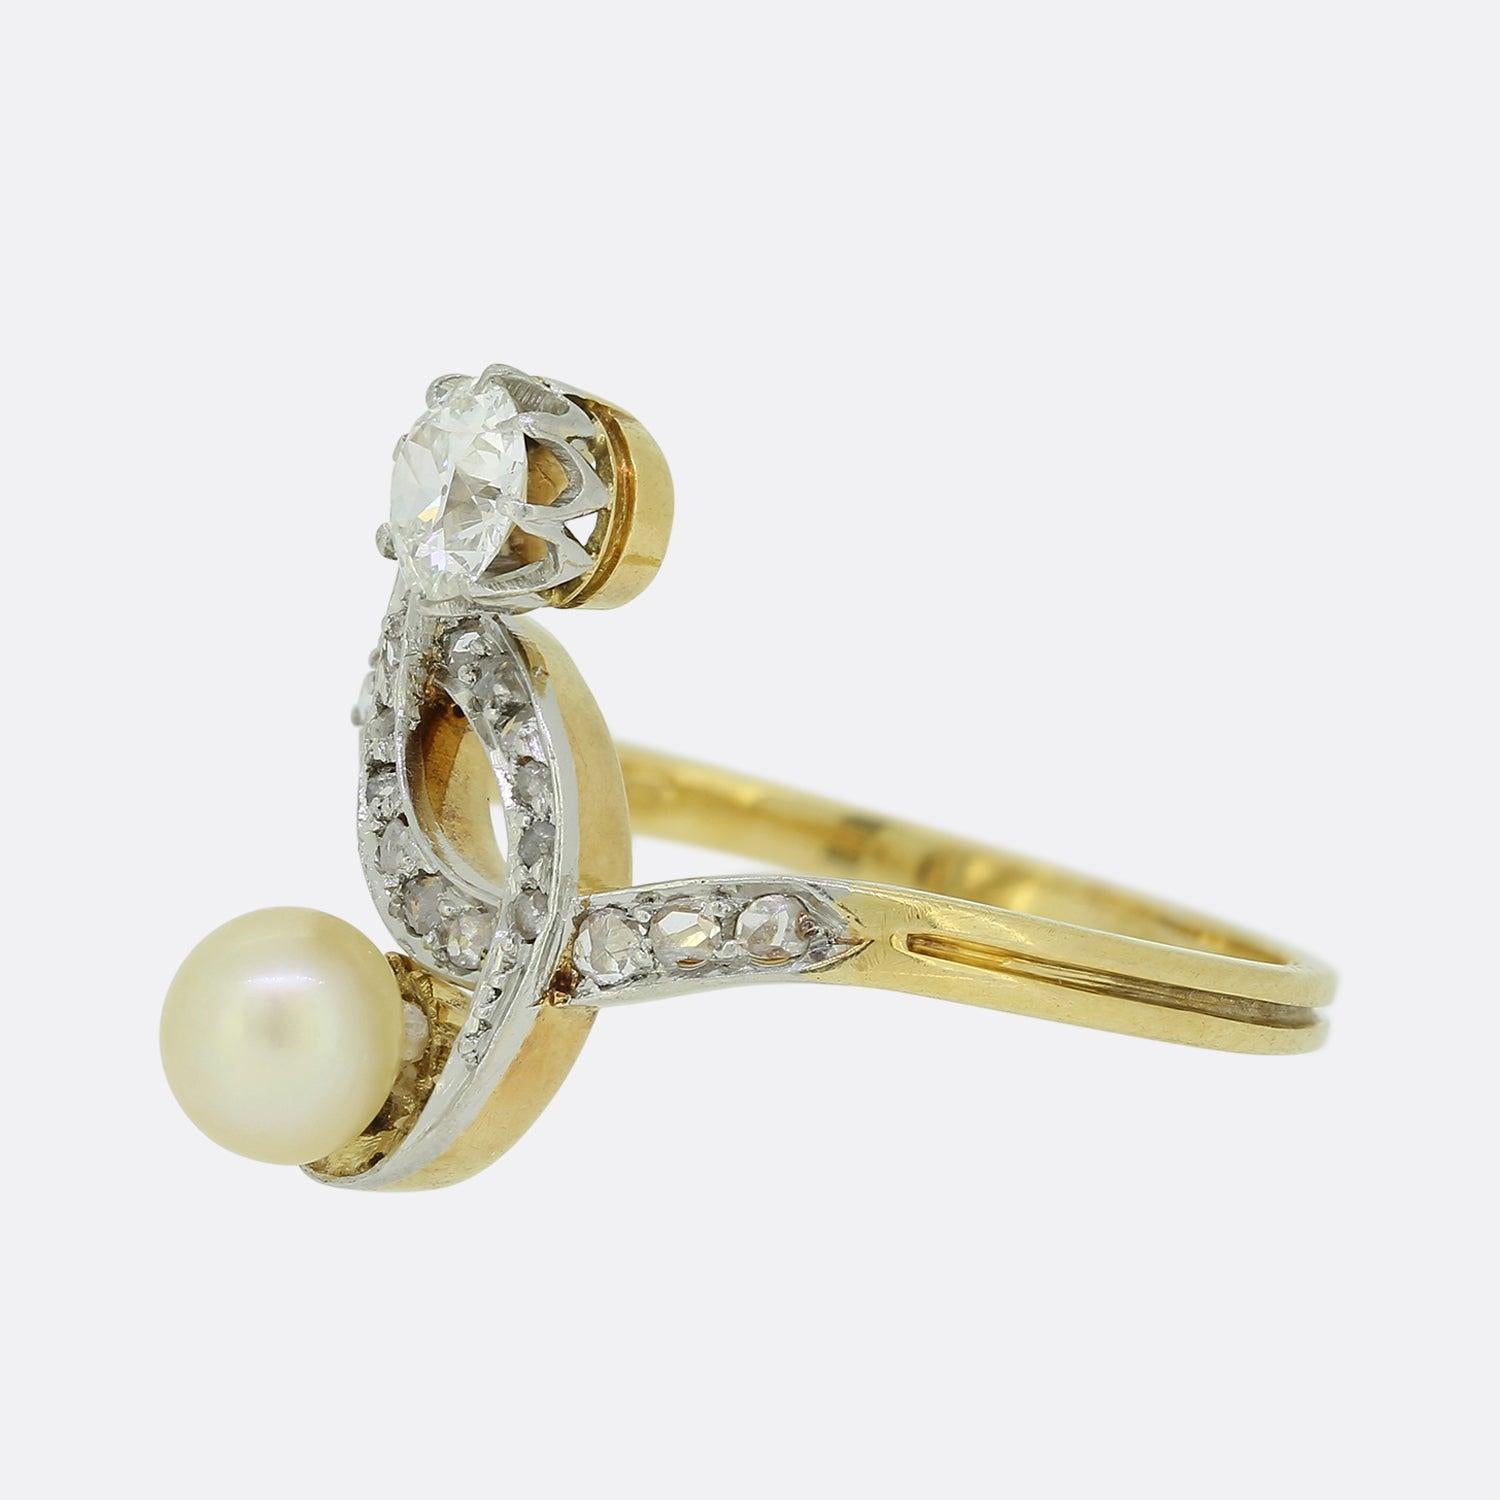 Here we have a charming pearl and diamond crossover ring from the Edwardian era. The swirling face of the piece showcases a round old cut diamond and a round natural pearl, with an interlocking backdrop of rose cut diamonds claw set in white gold